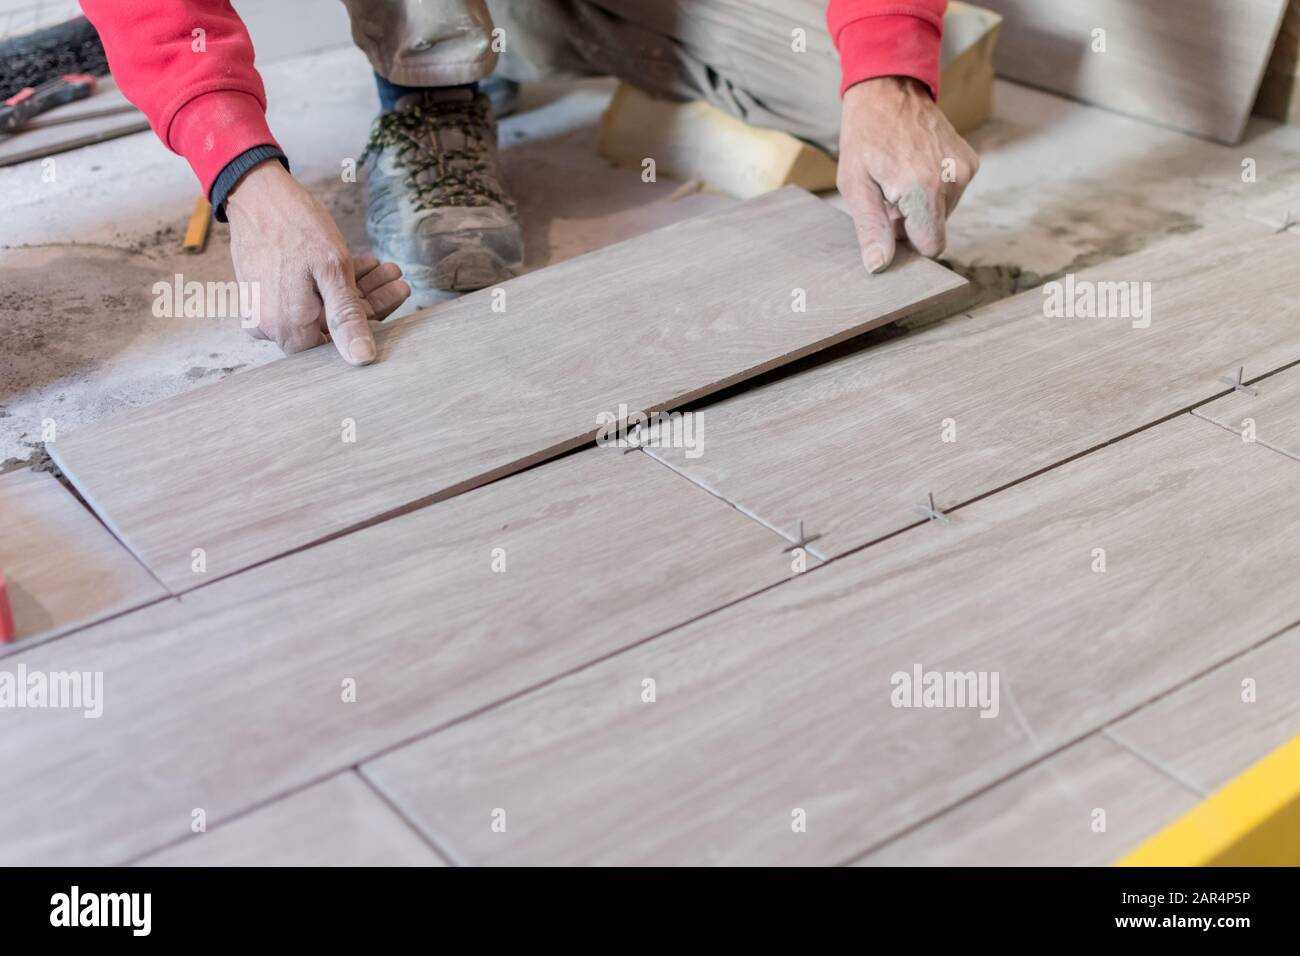 Man installing rectangular shaped floor tiles in kitchen. Applying adhesive before installation and verifying afterwards Stock Photo